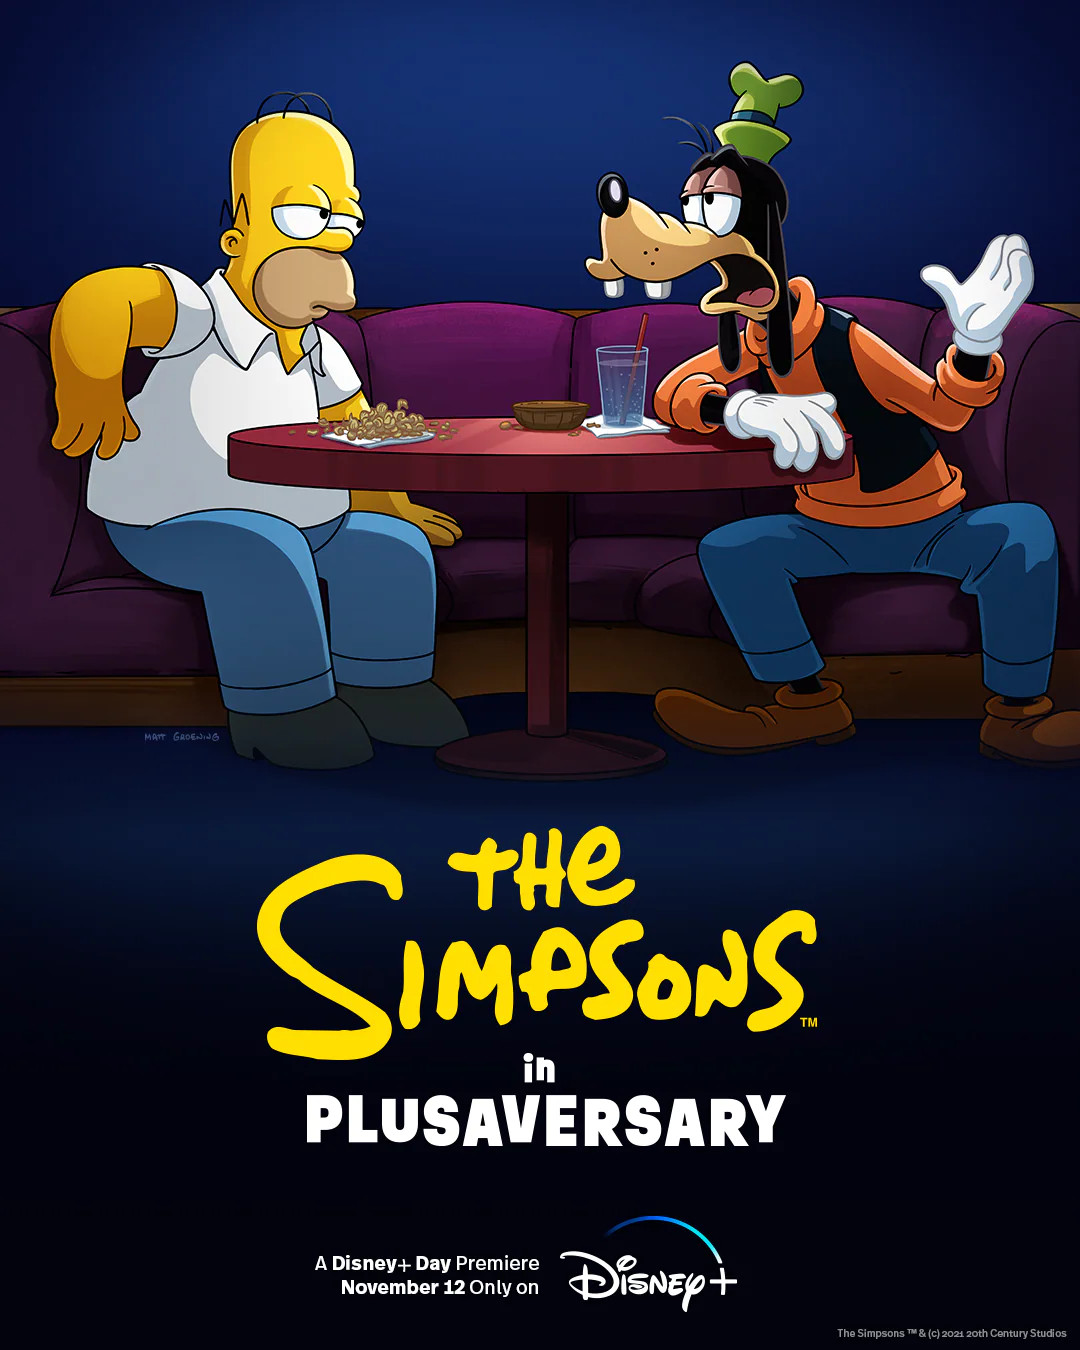 The Simpsons Disney Plus Day poster